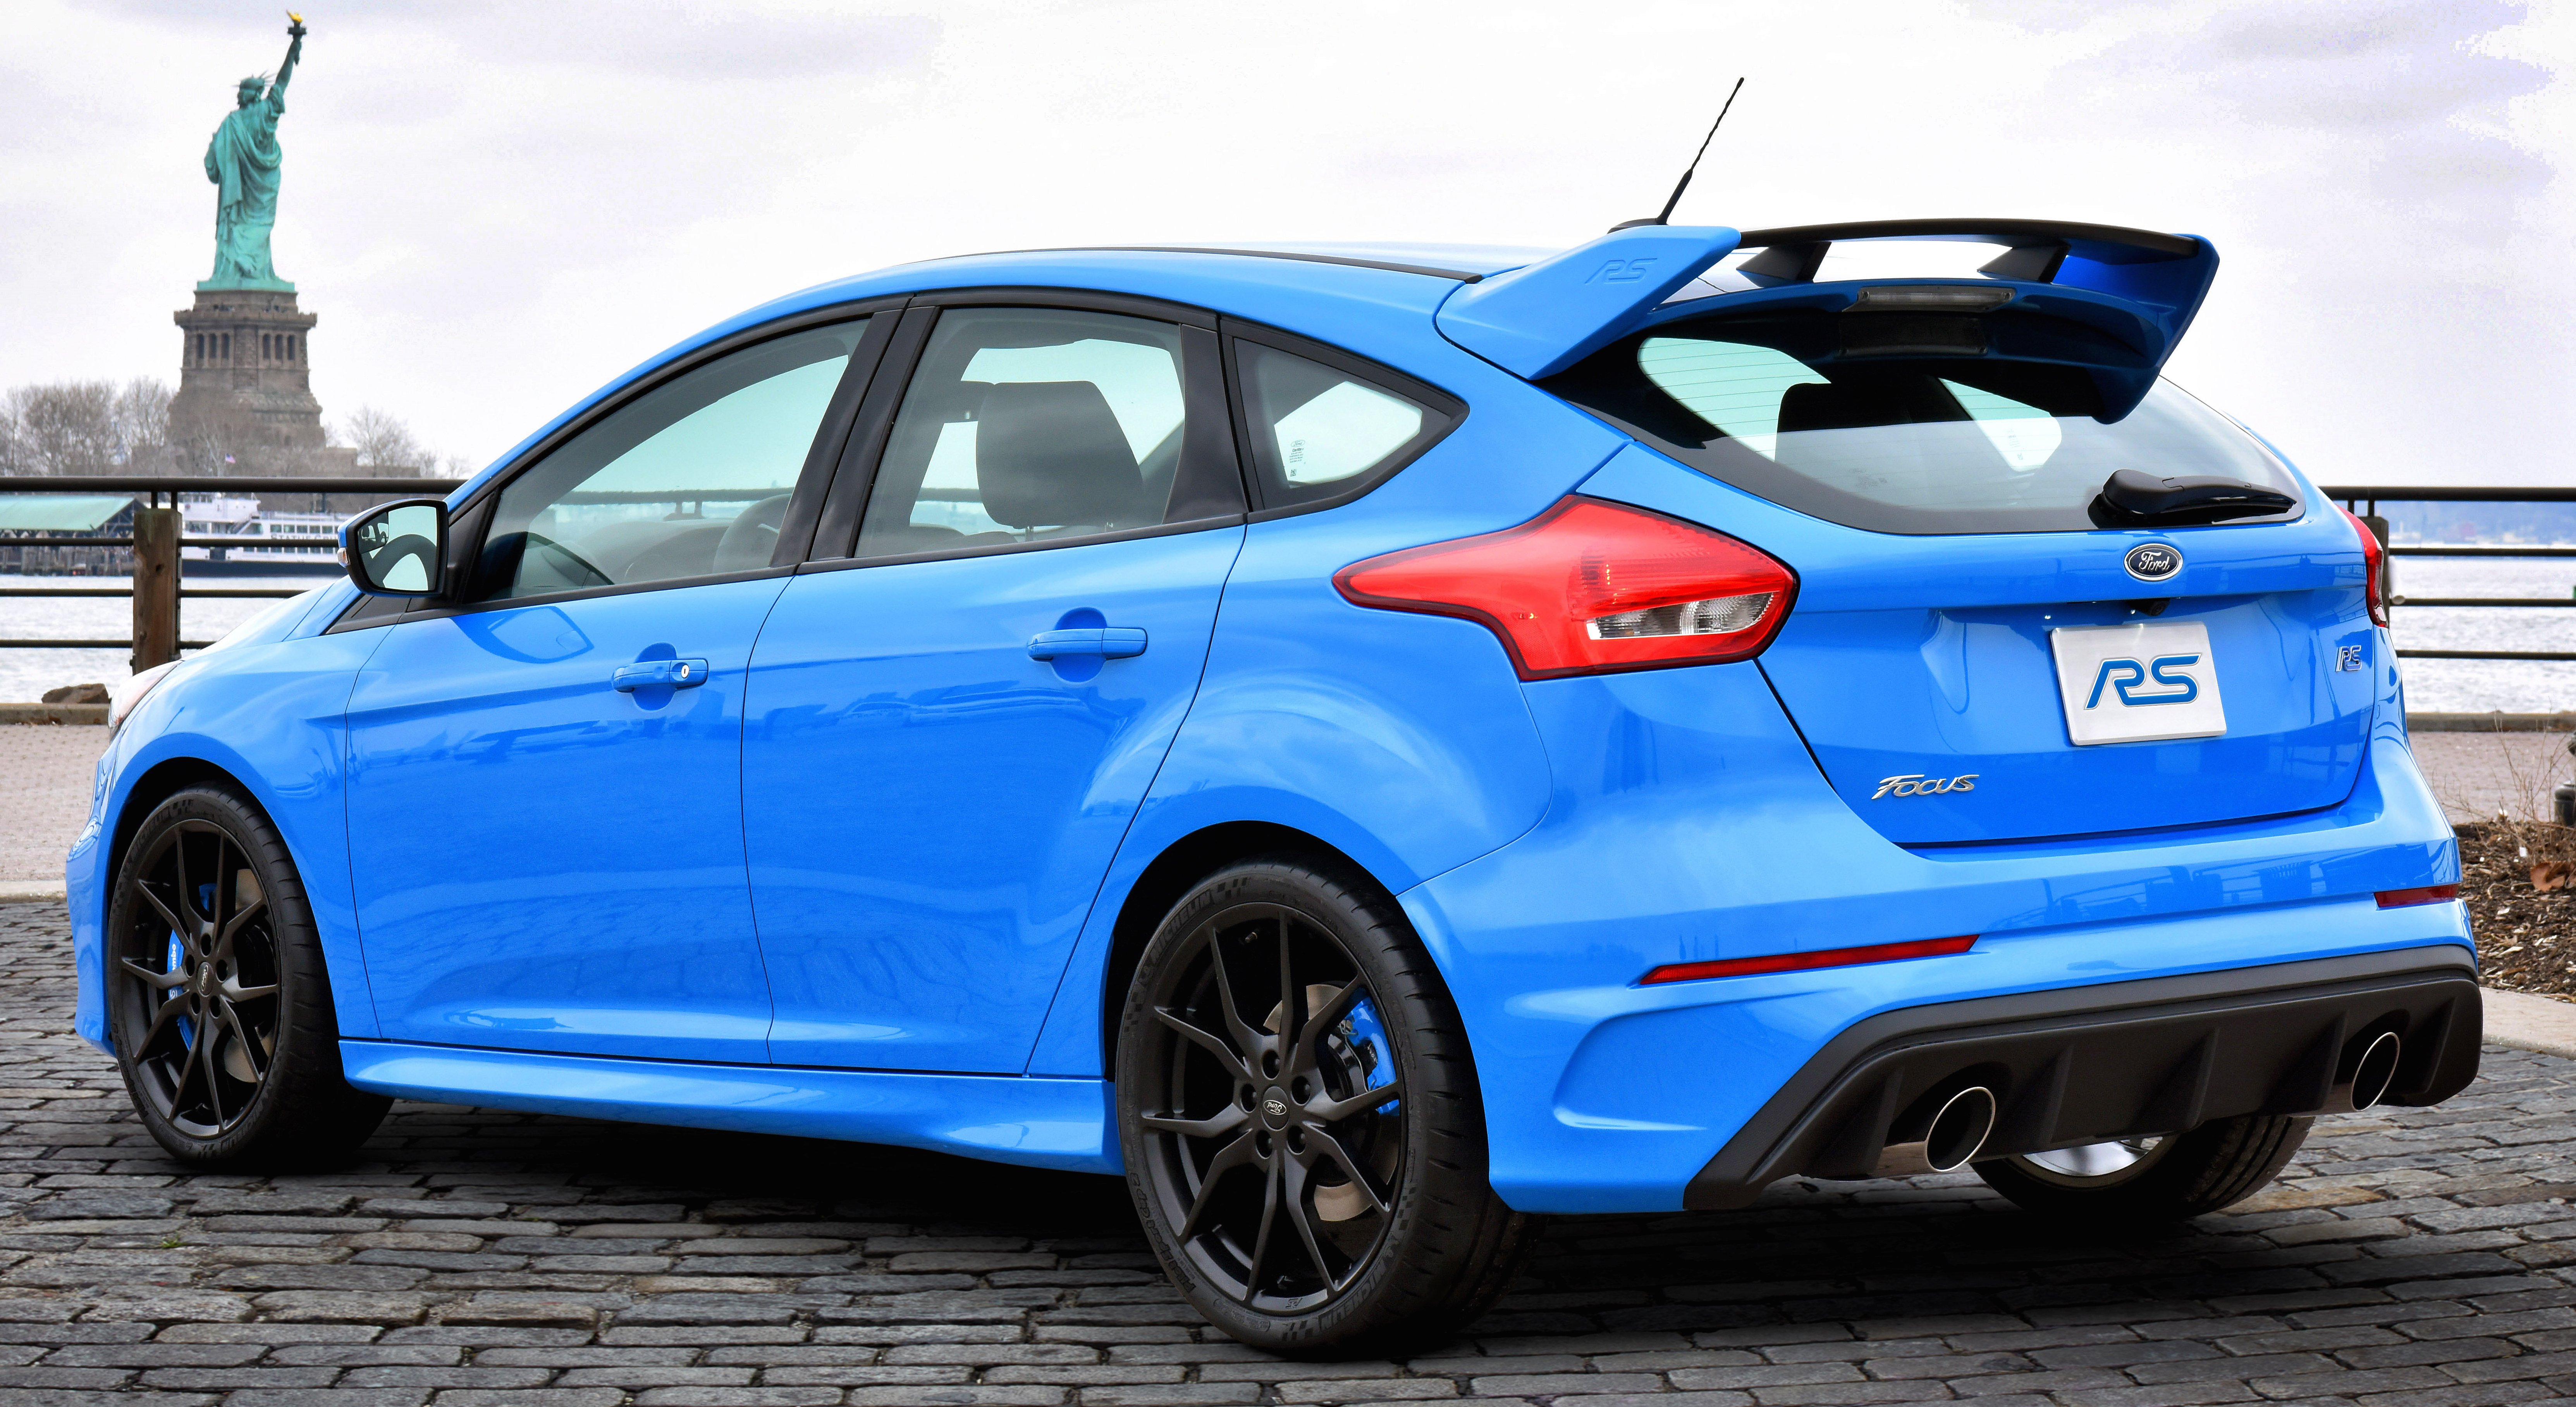 2016 Ford Focus RS pricing and specifications - Photos (1 of 5)